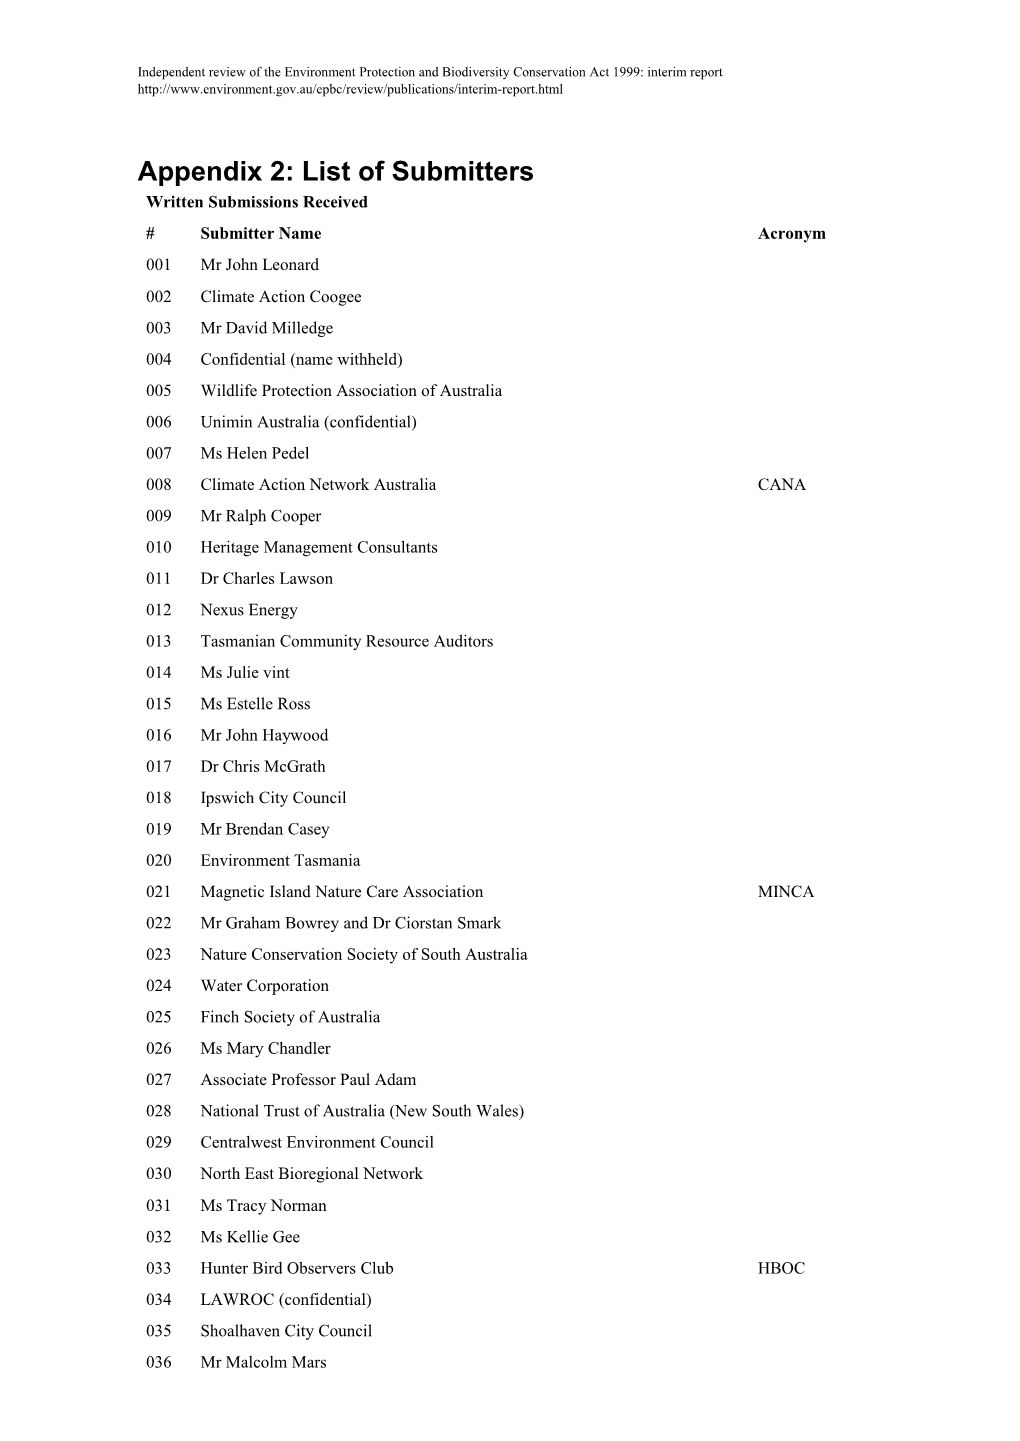 List of Submitters (In: Independent Review of the Environment Protection and Biodiversity